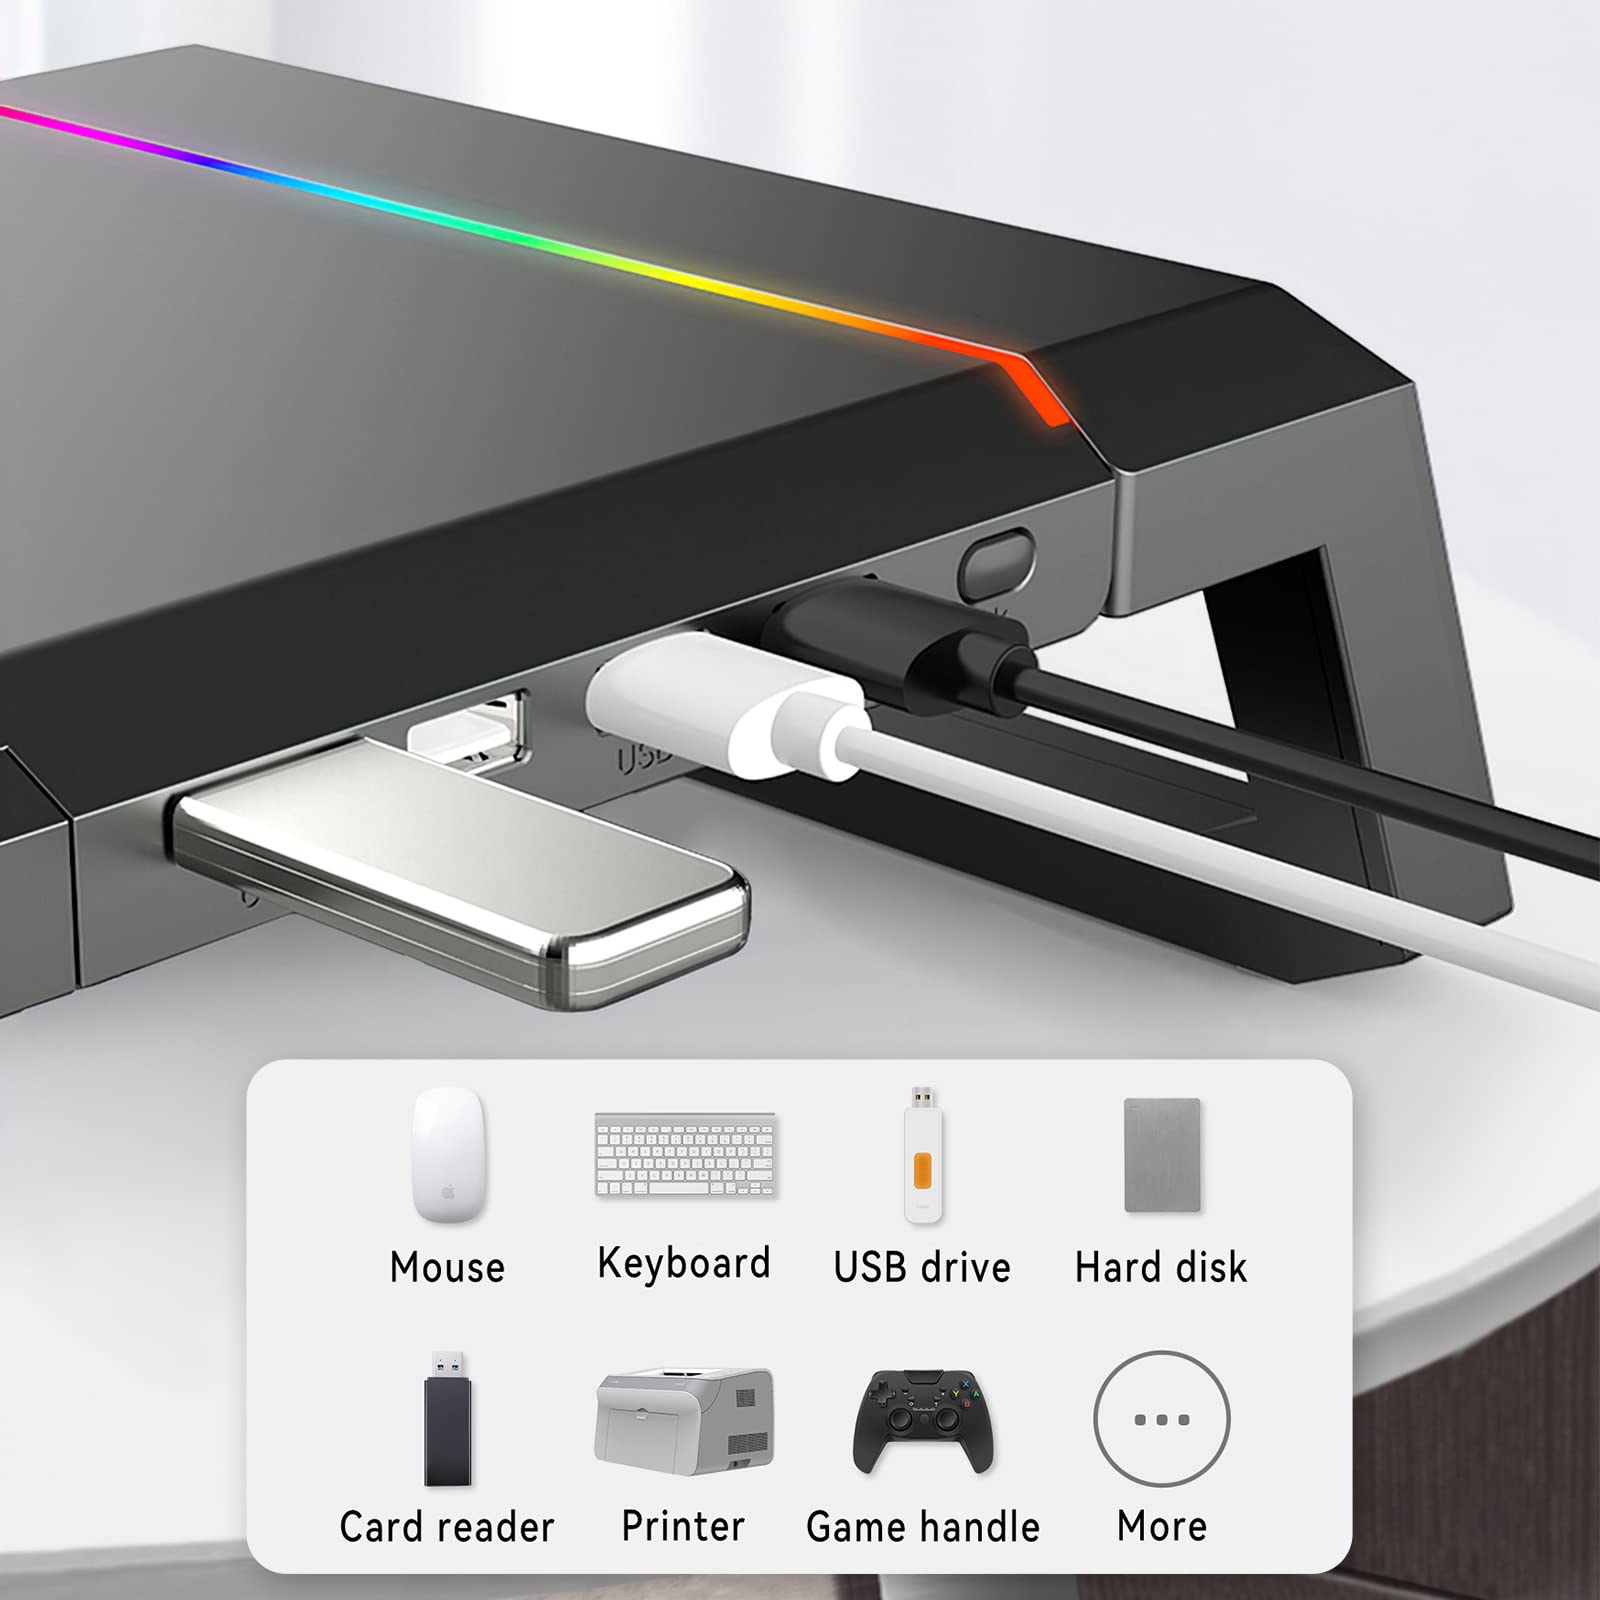 KYOLLY RGB Gaming Computer Monitor Stand Riser with Drawer,Storage and Phone Holder - 1 USB 3.0 and 3 USB 2.0 Hub, 3 Length Adjustable